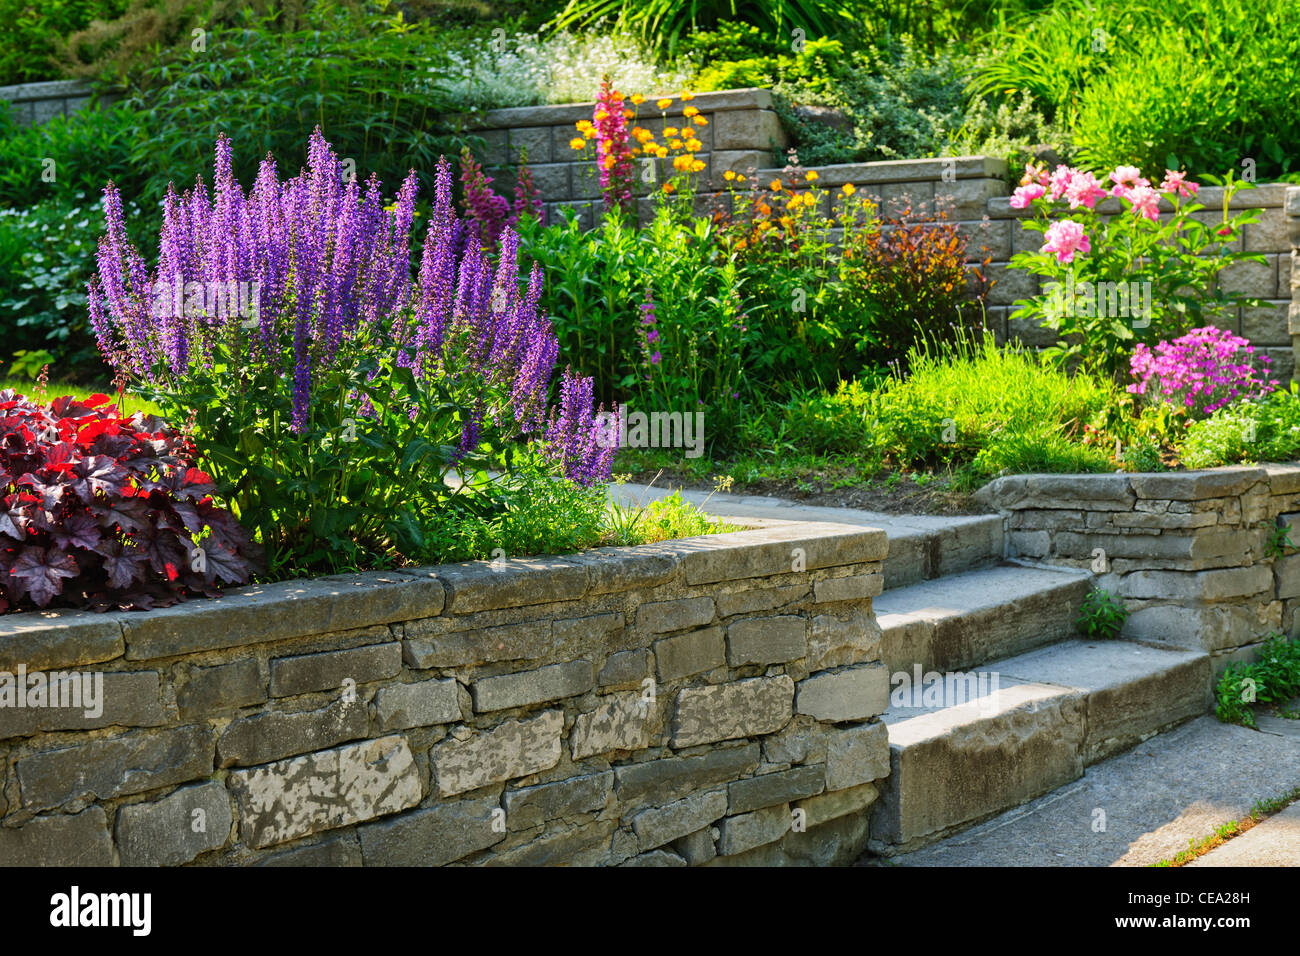 Natural stone landscaping in home garden with steps and flowerbeds Stock Photo